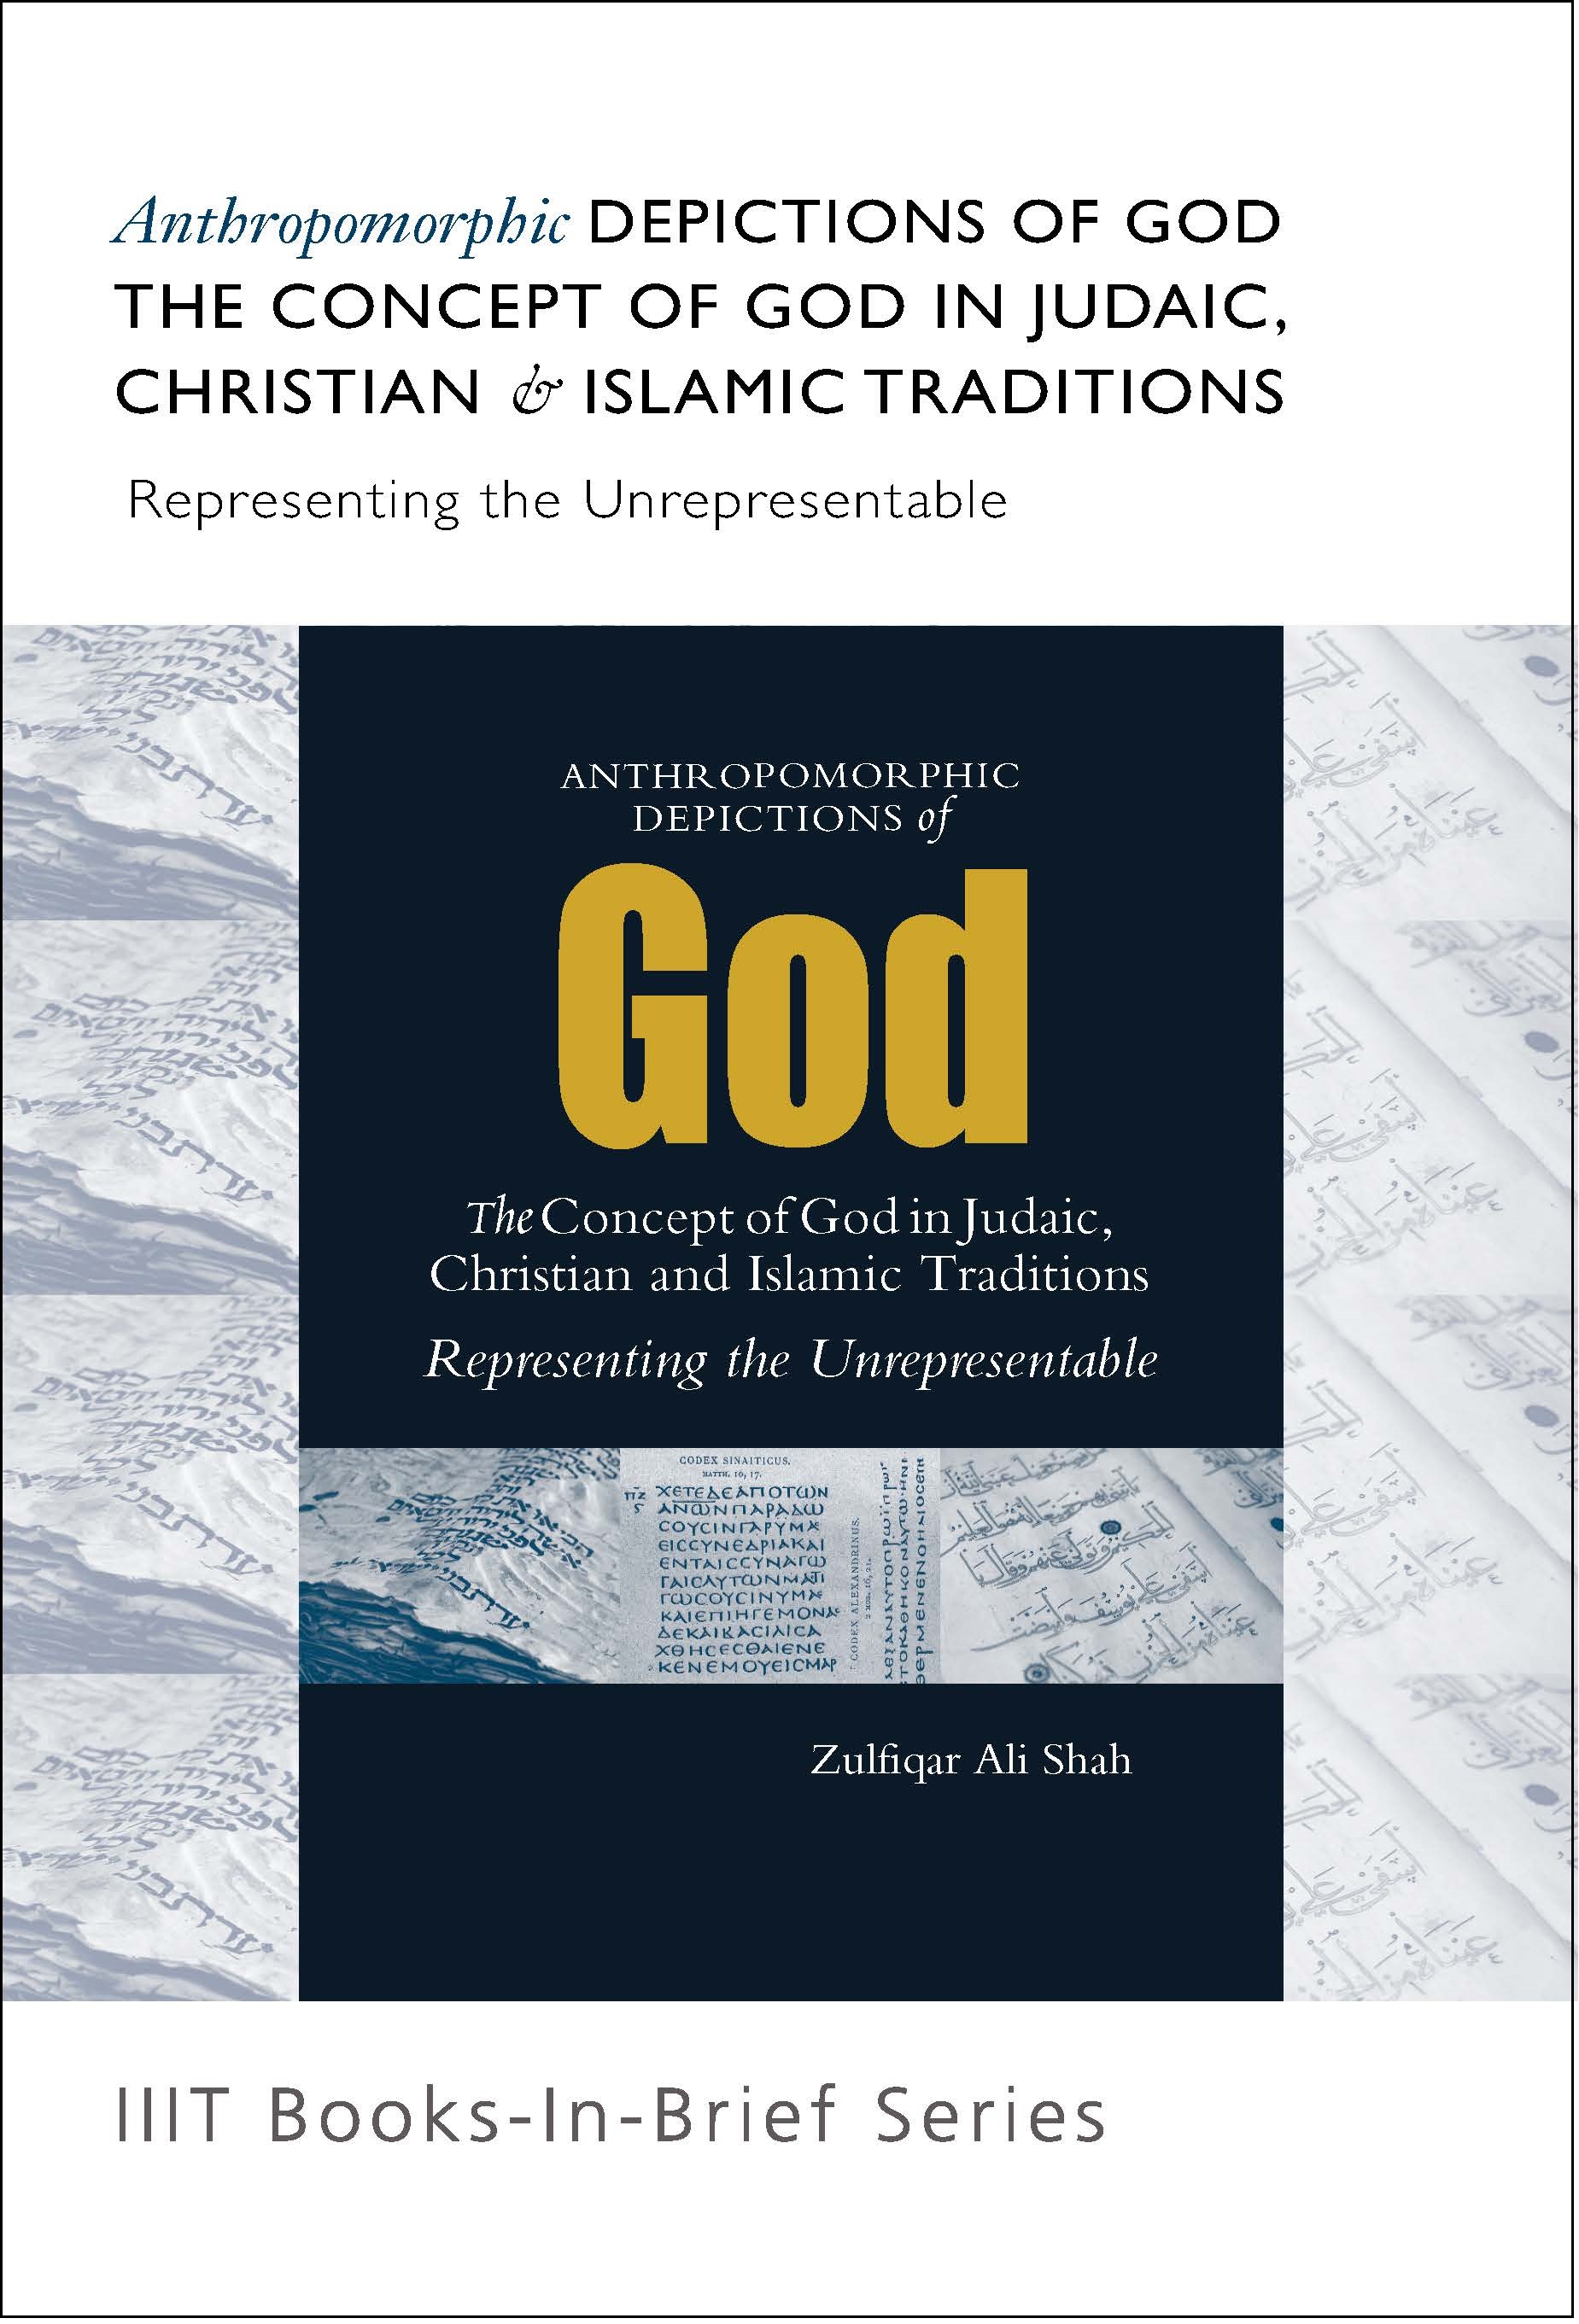 Anthropomorphic Depictions of God: The Concept of God in Judaic, Christian, and Islamic Traditions: Representing the Unrepresentable